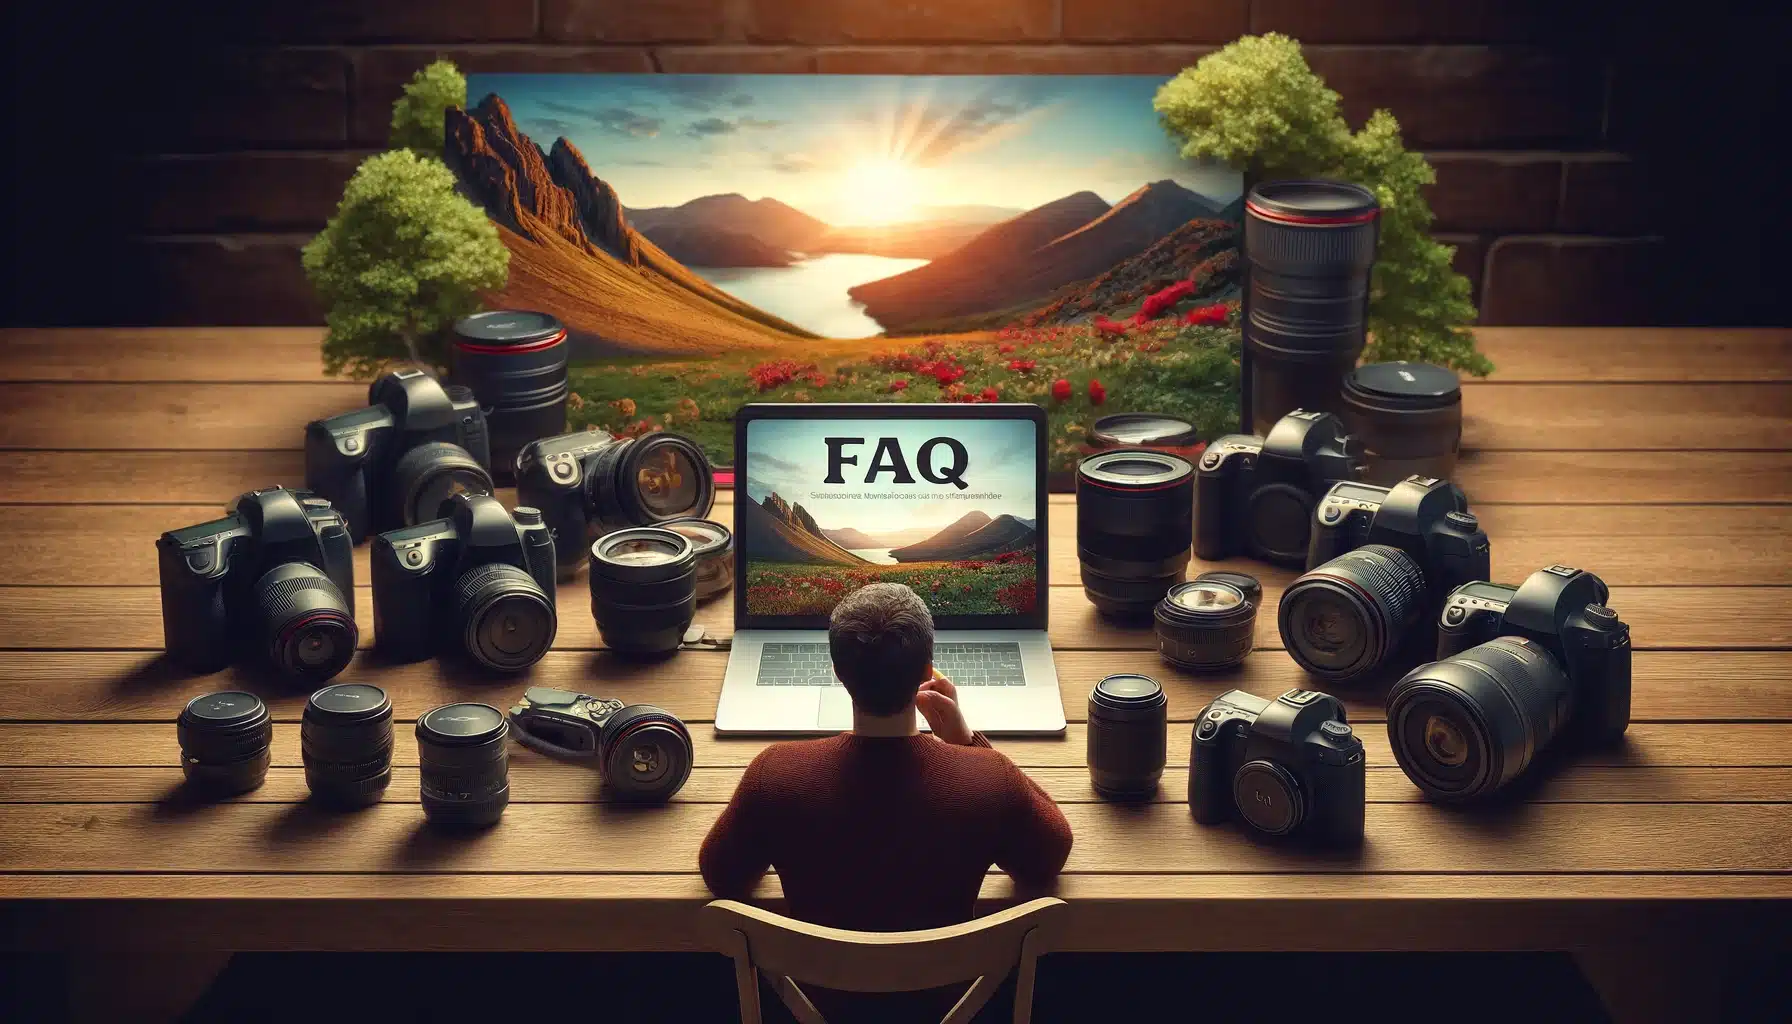 Photographer consulting a FAQ page on a laptop with various cameras laid out in a scenic setting.